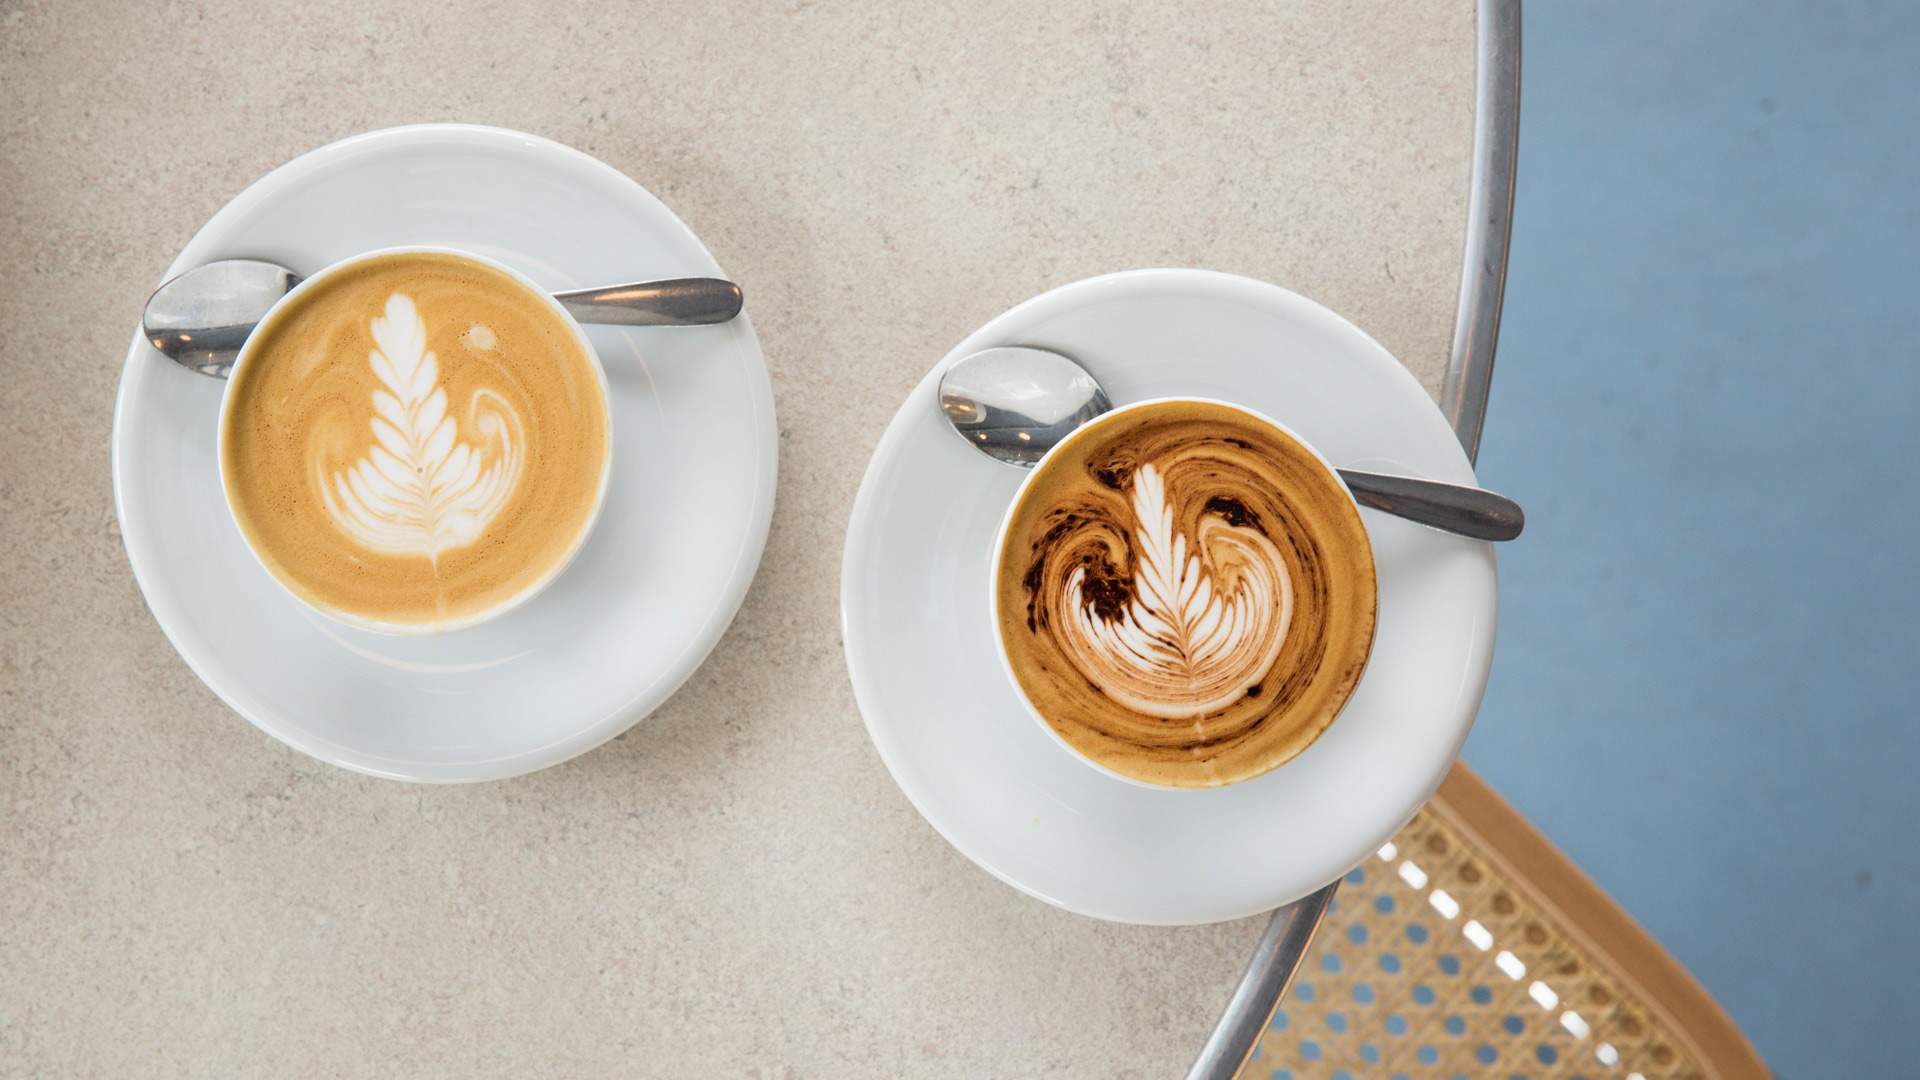 Melbourne's First Reusable Coffee Cup Sharing Network Is Launching This Week